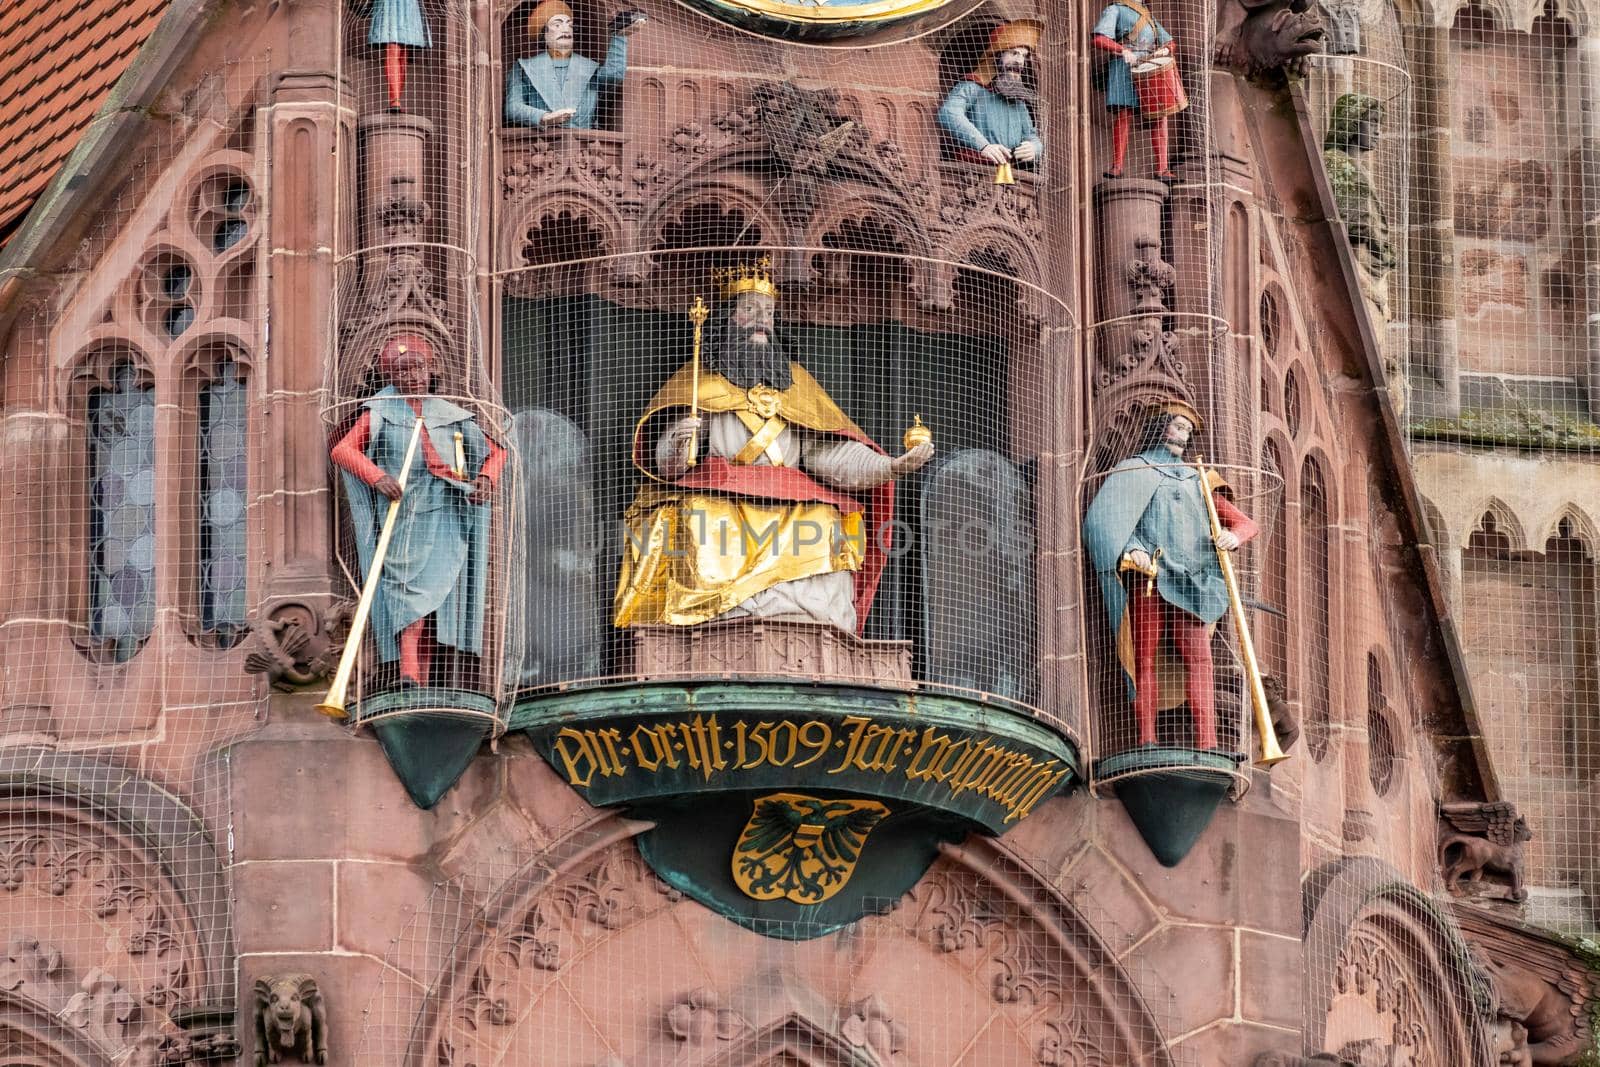 Close-up of holy figures and other details from the Frauenkirche (woman church) in Nuremberg, Bavaria, Germany by reinerc